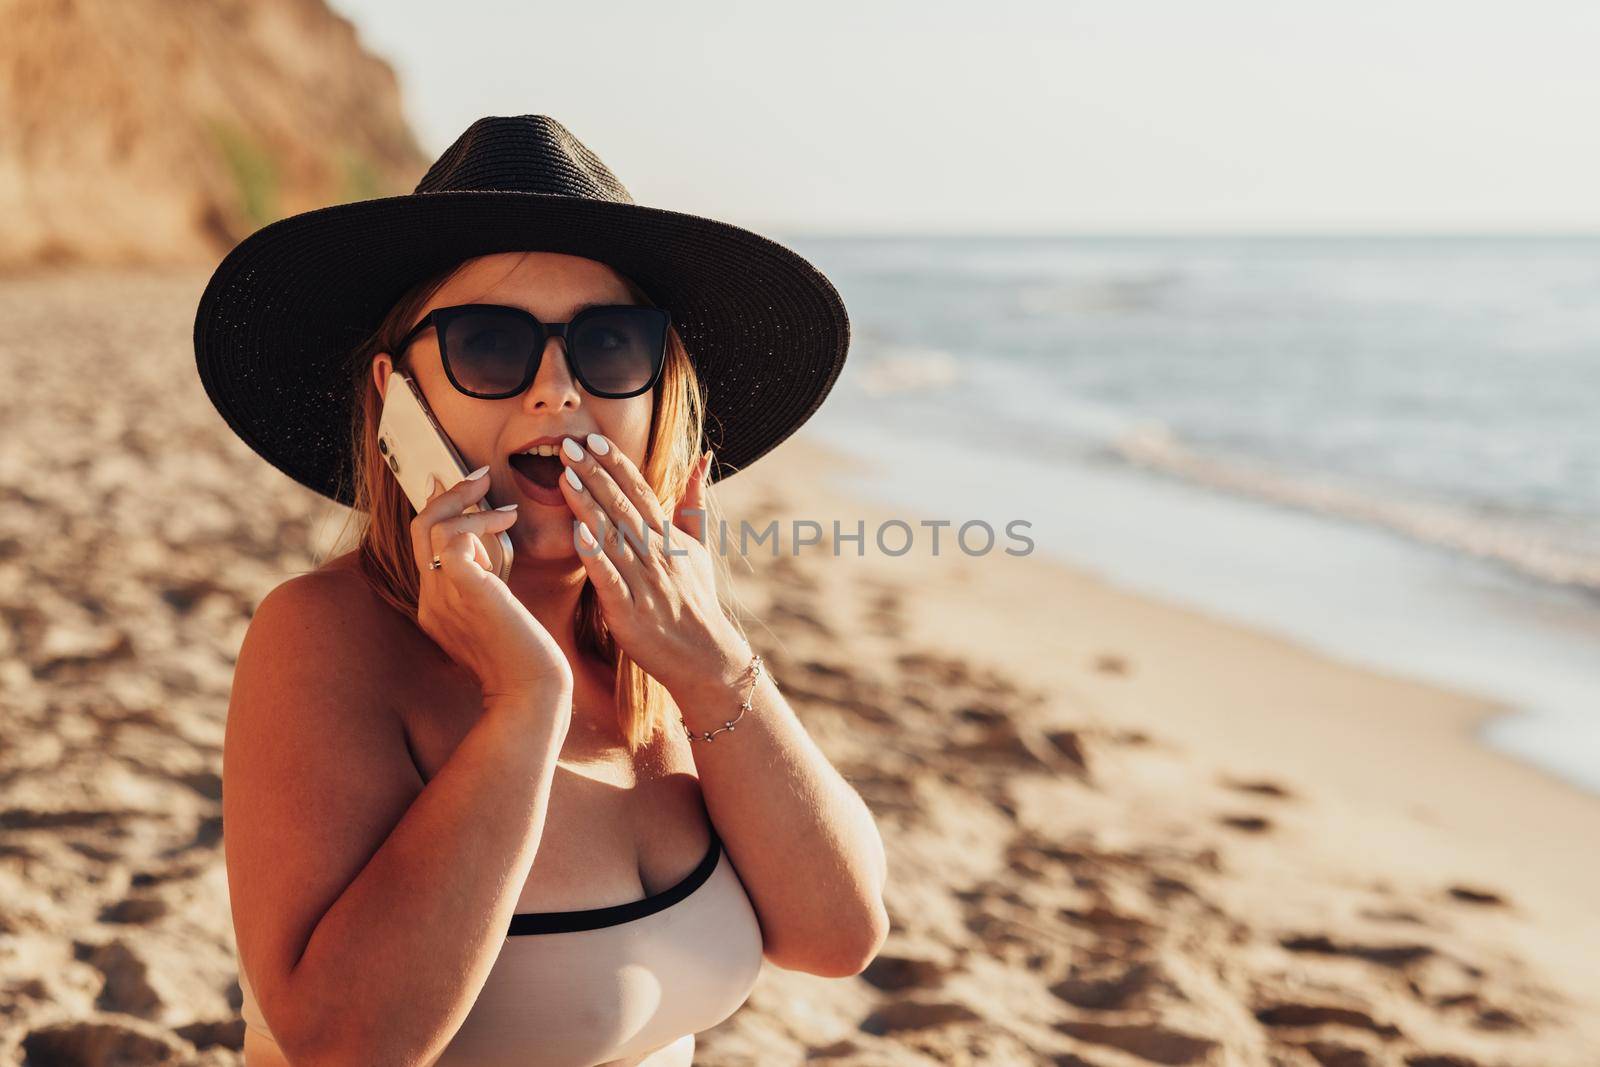 Young Woman Emotionally Expresses Surprise While Talking on the Phone on Sandy Beach by Sea